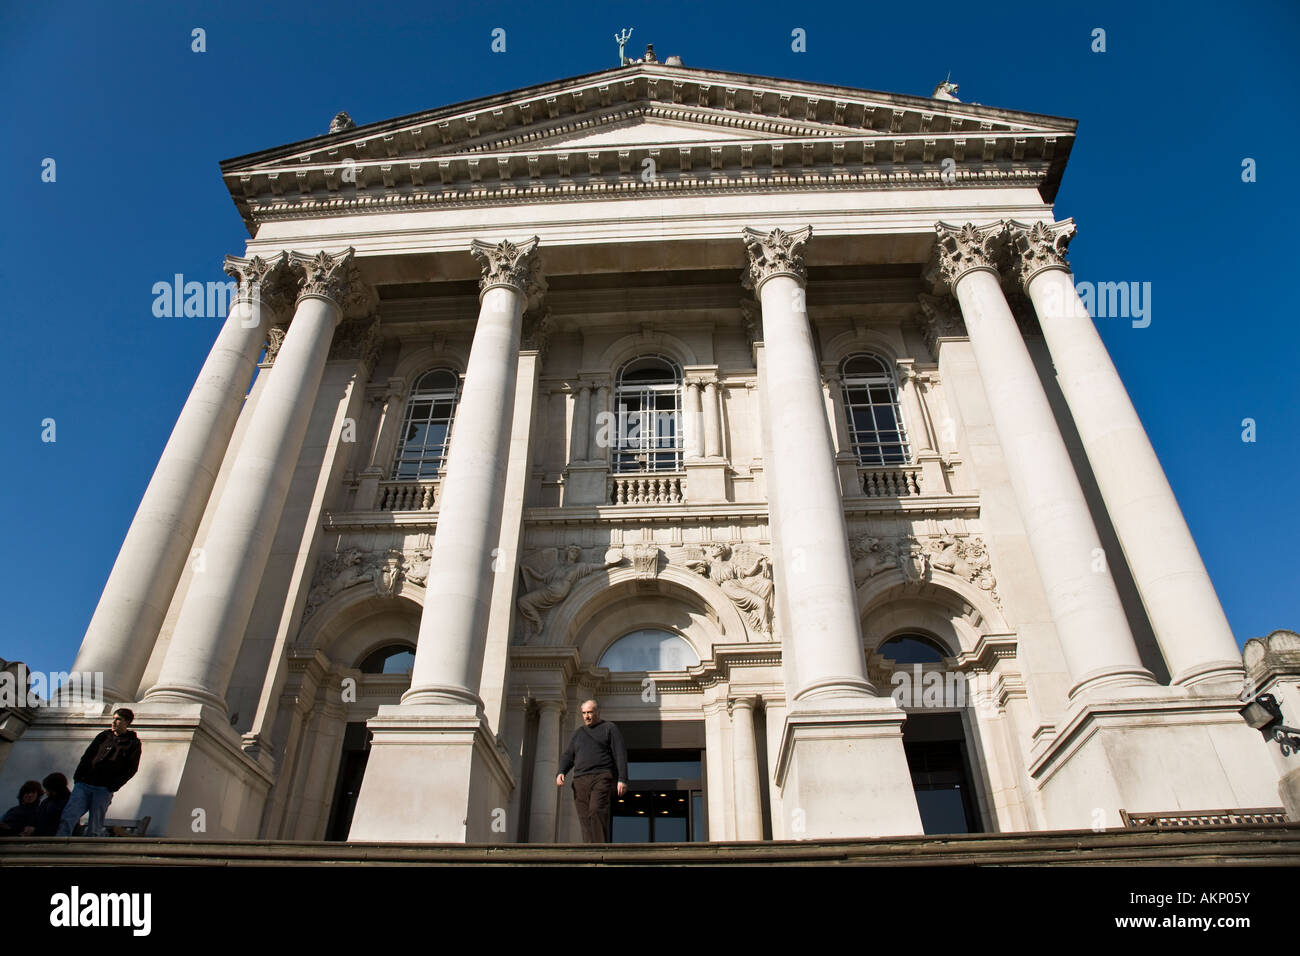 The front entrance to the Tate Britain art gallery on Millbank, London, England. Stock Photo